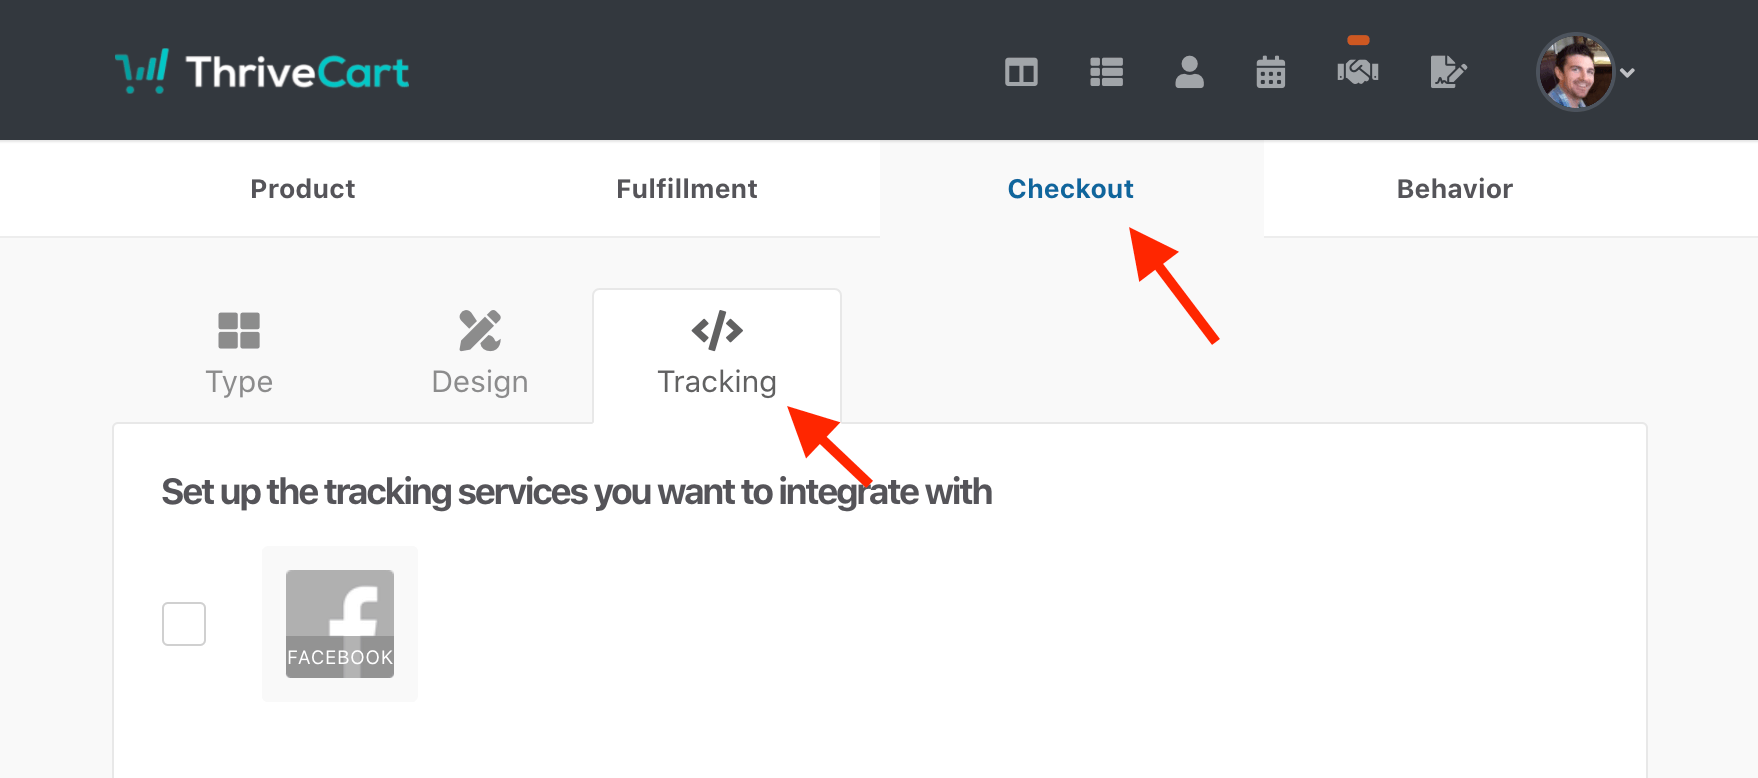 add convertbox embed code to thrivecart